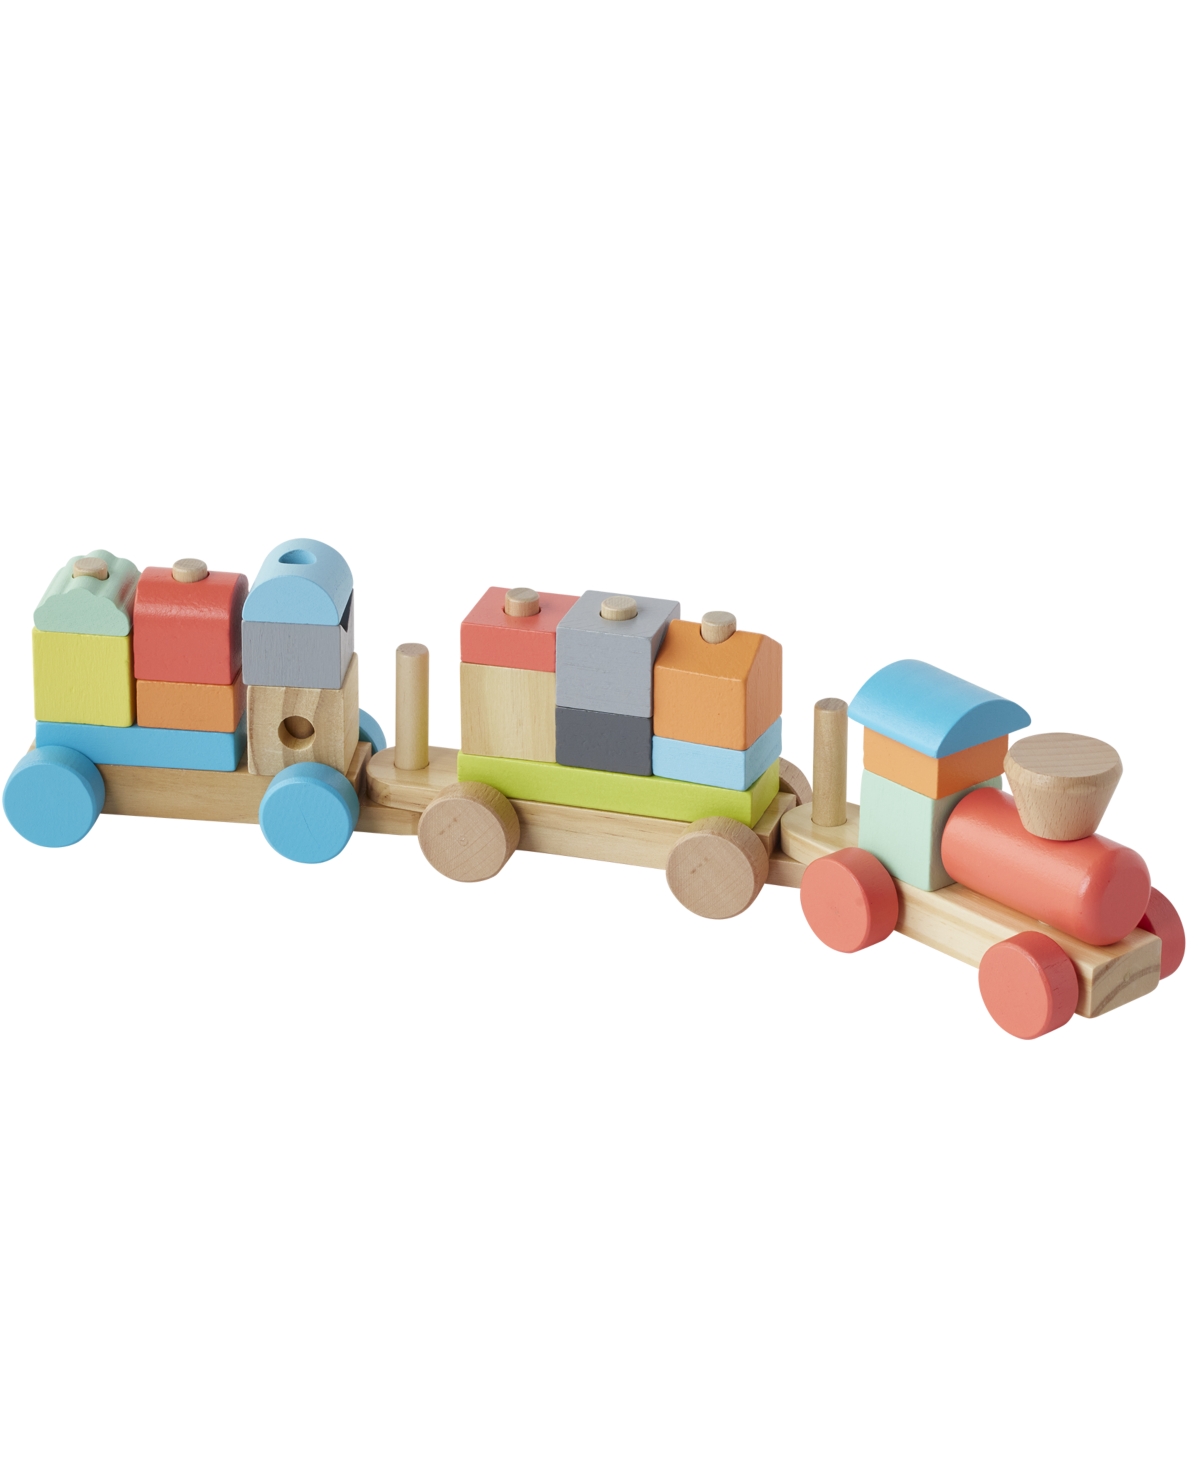 Imaginarium Stack and Play Trio, Created for You by Toys R Us